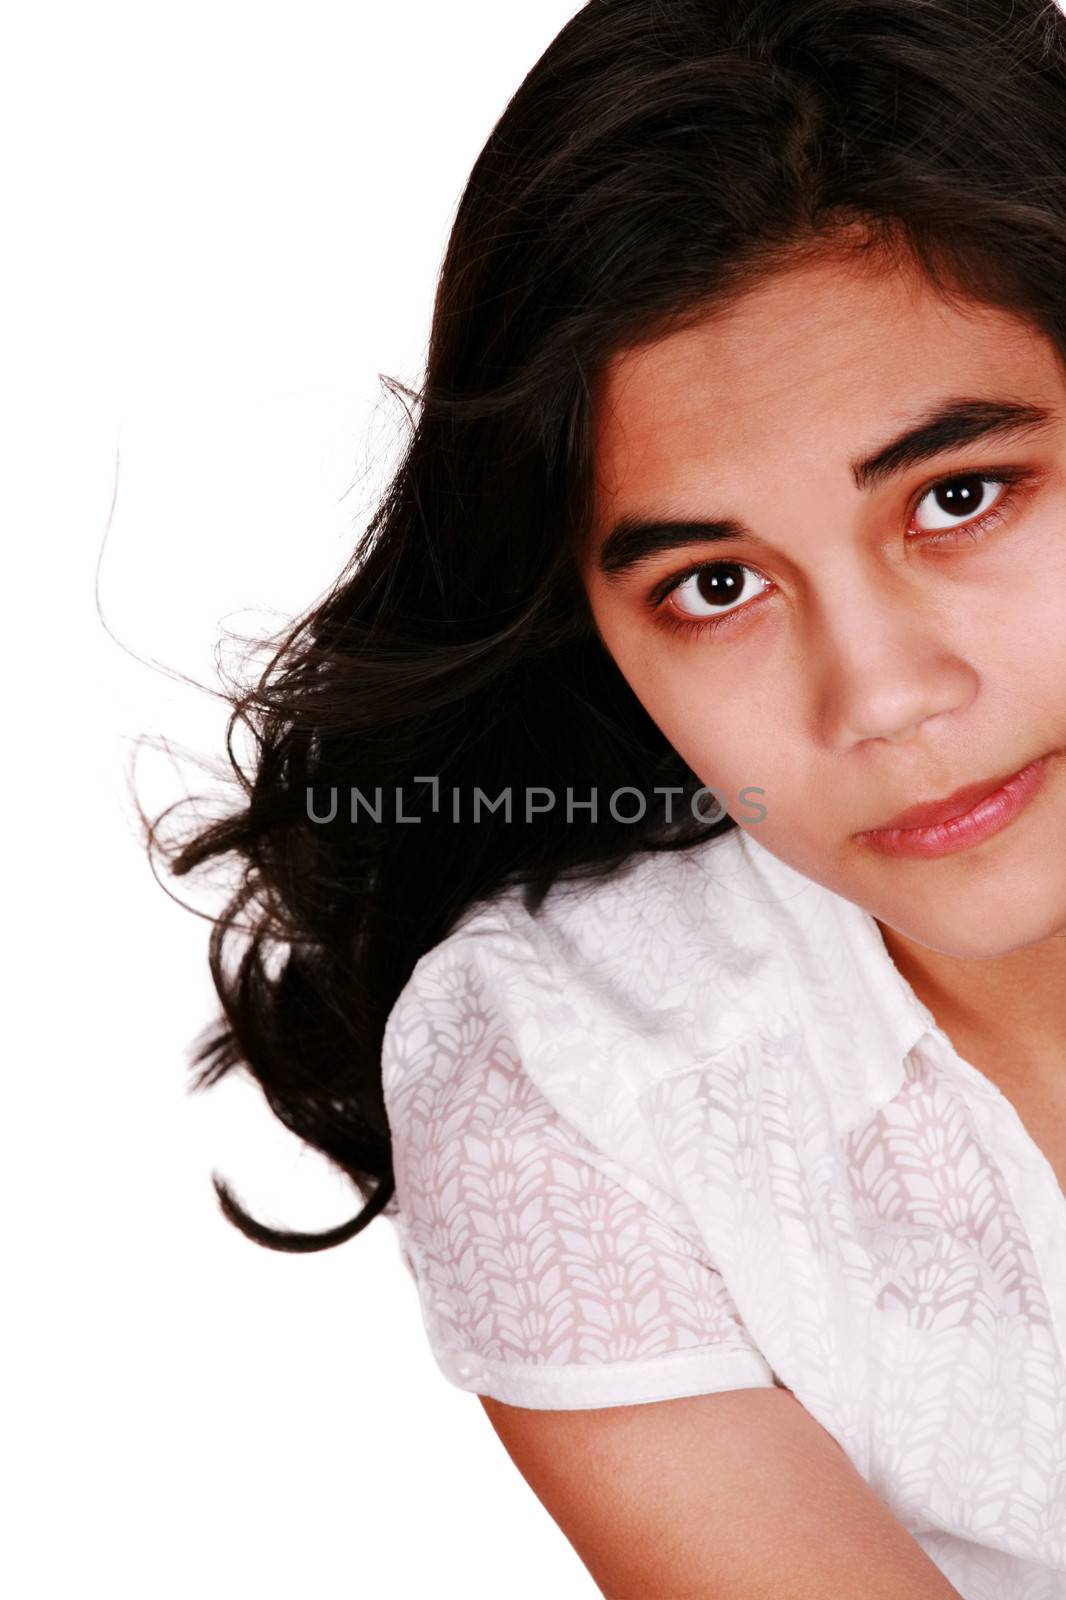 Beautiful biracial teen looking up with sad expression by jarenwicklund